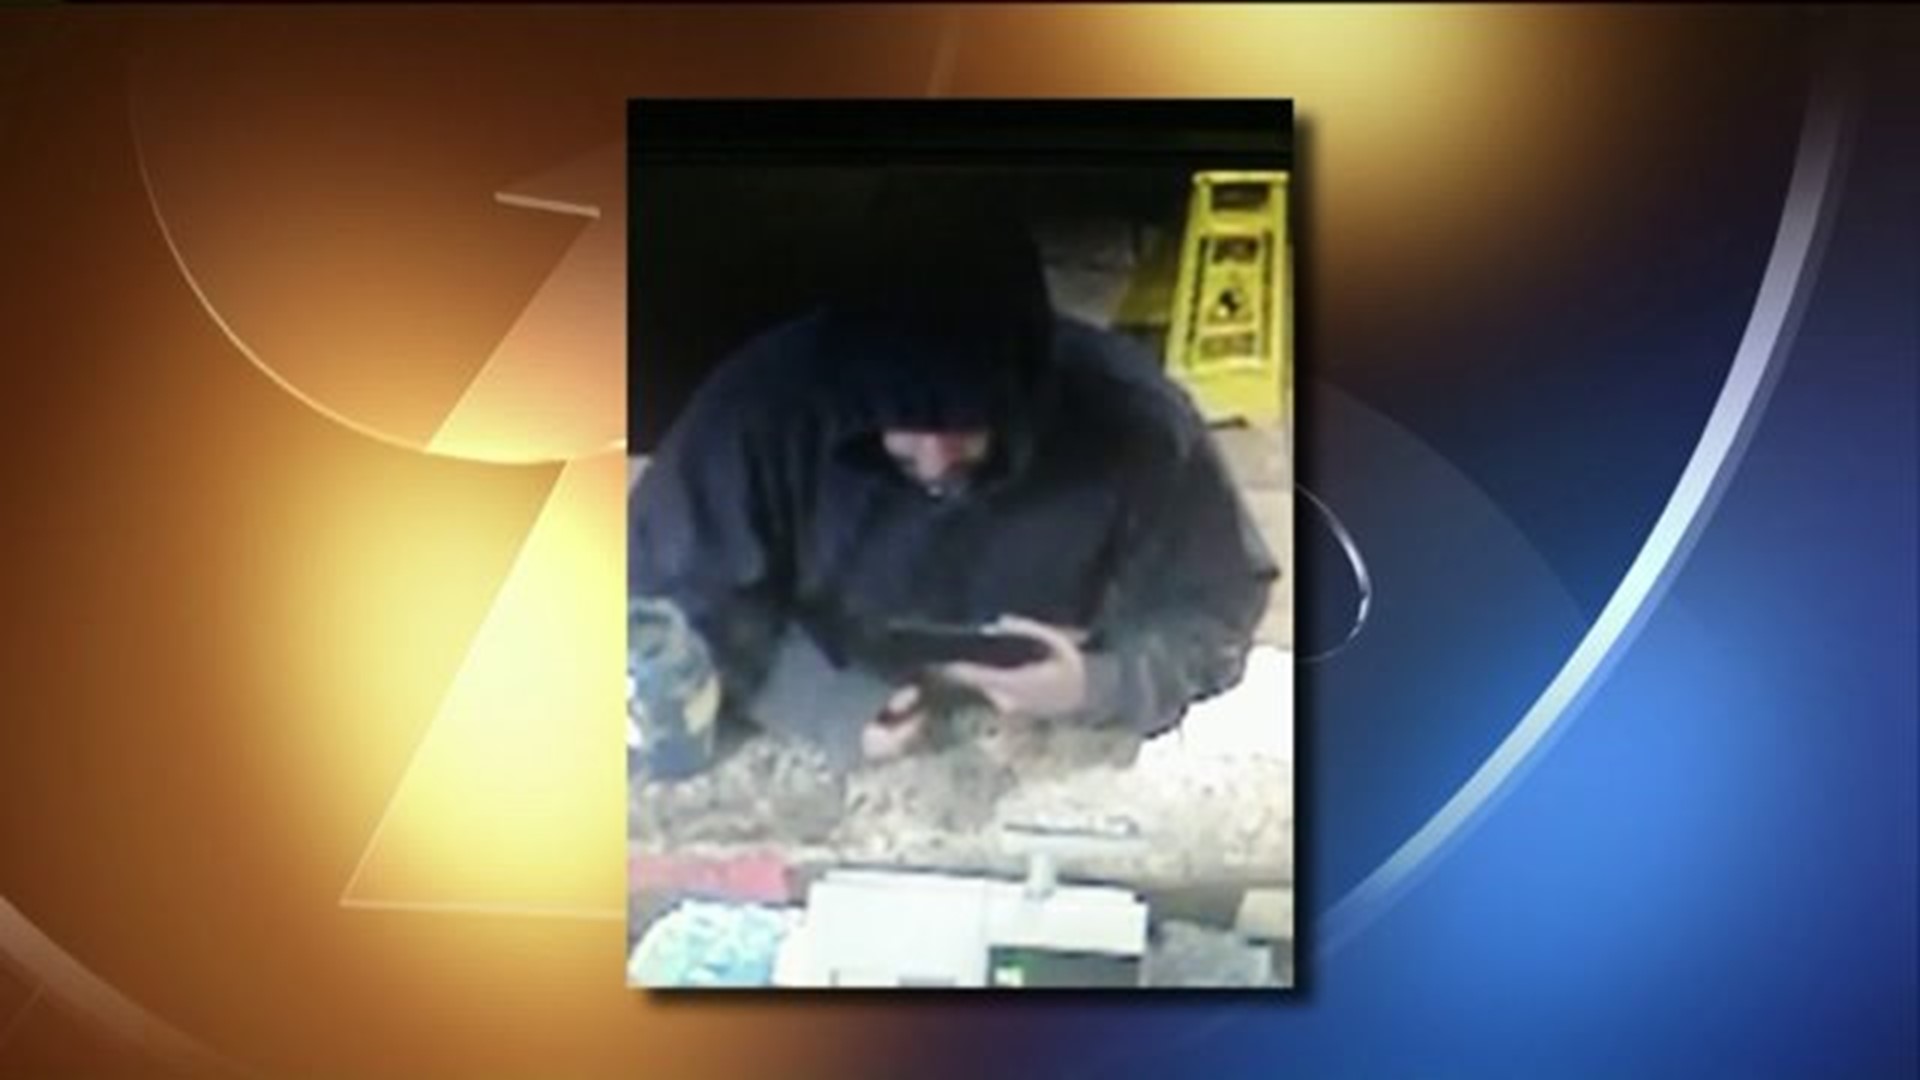 Police Searching for Alleged Donut Shop Robber